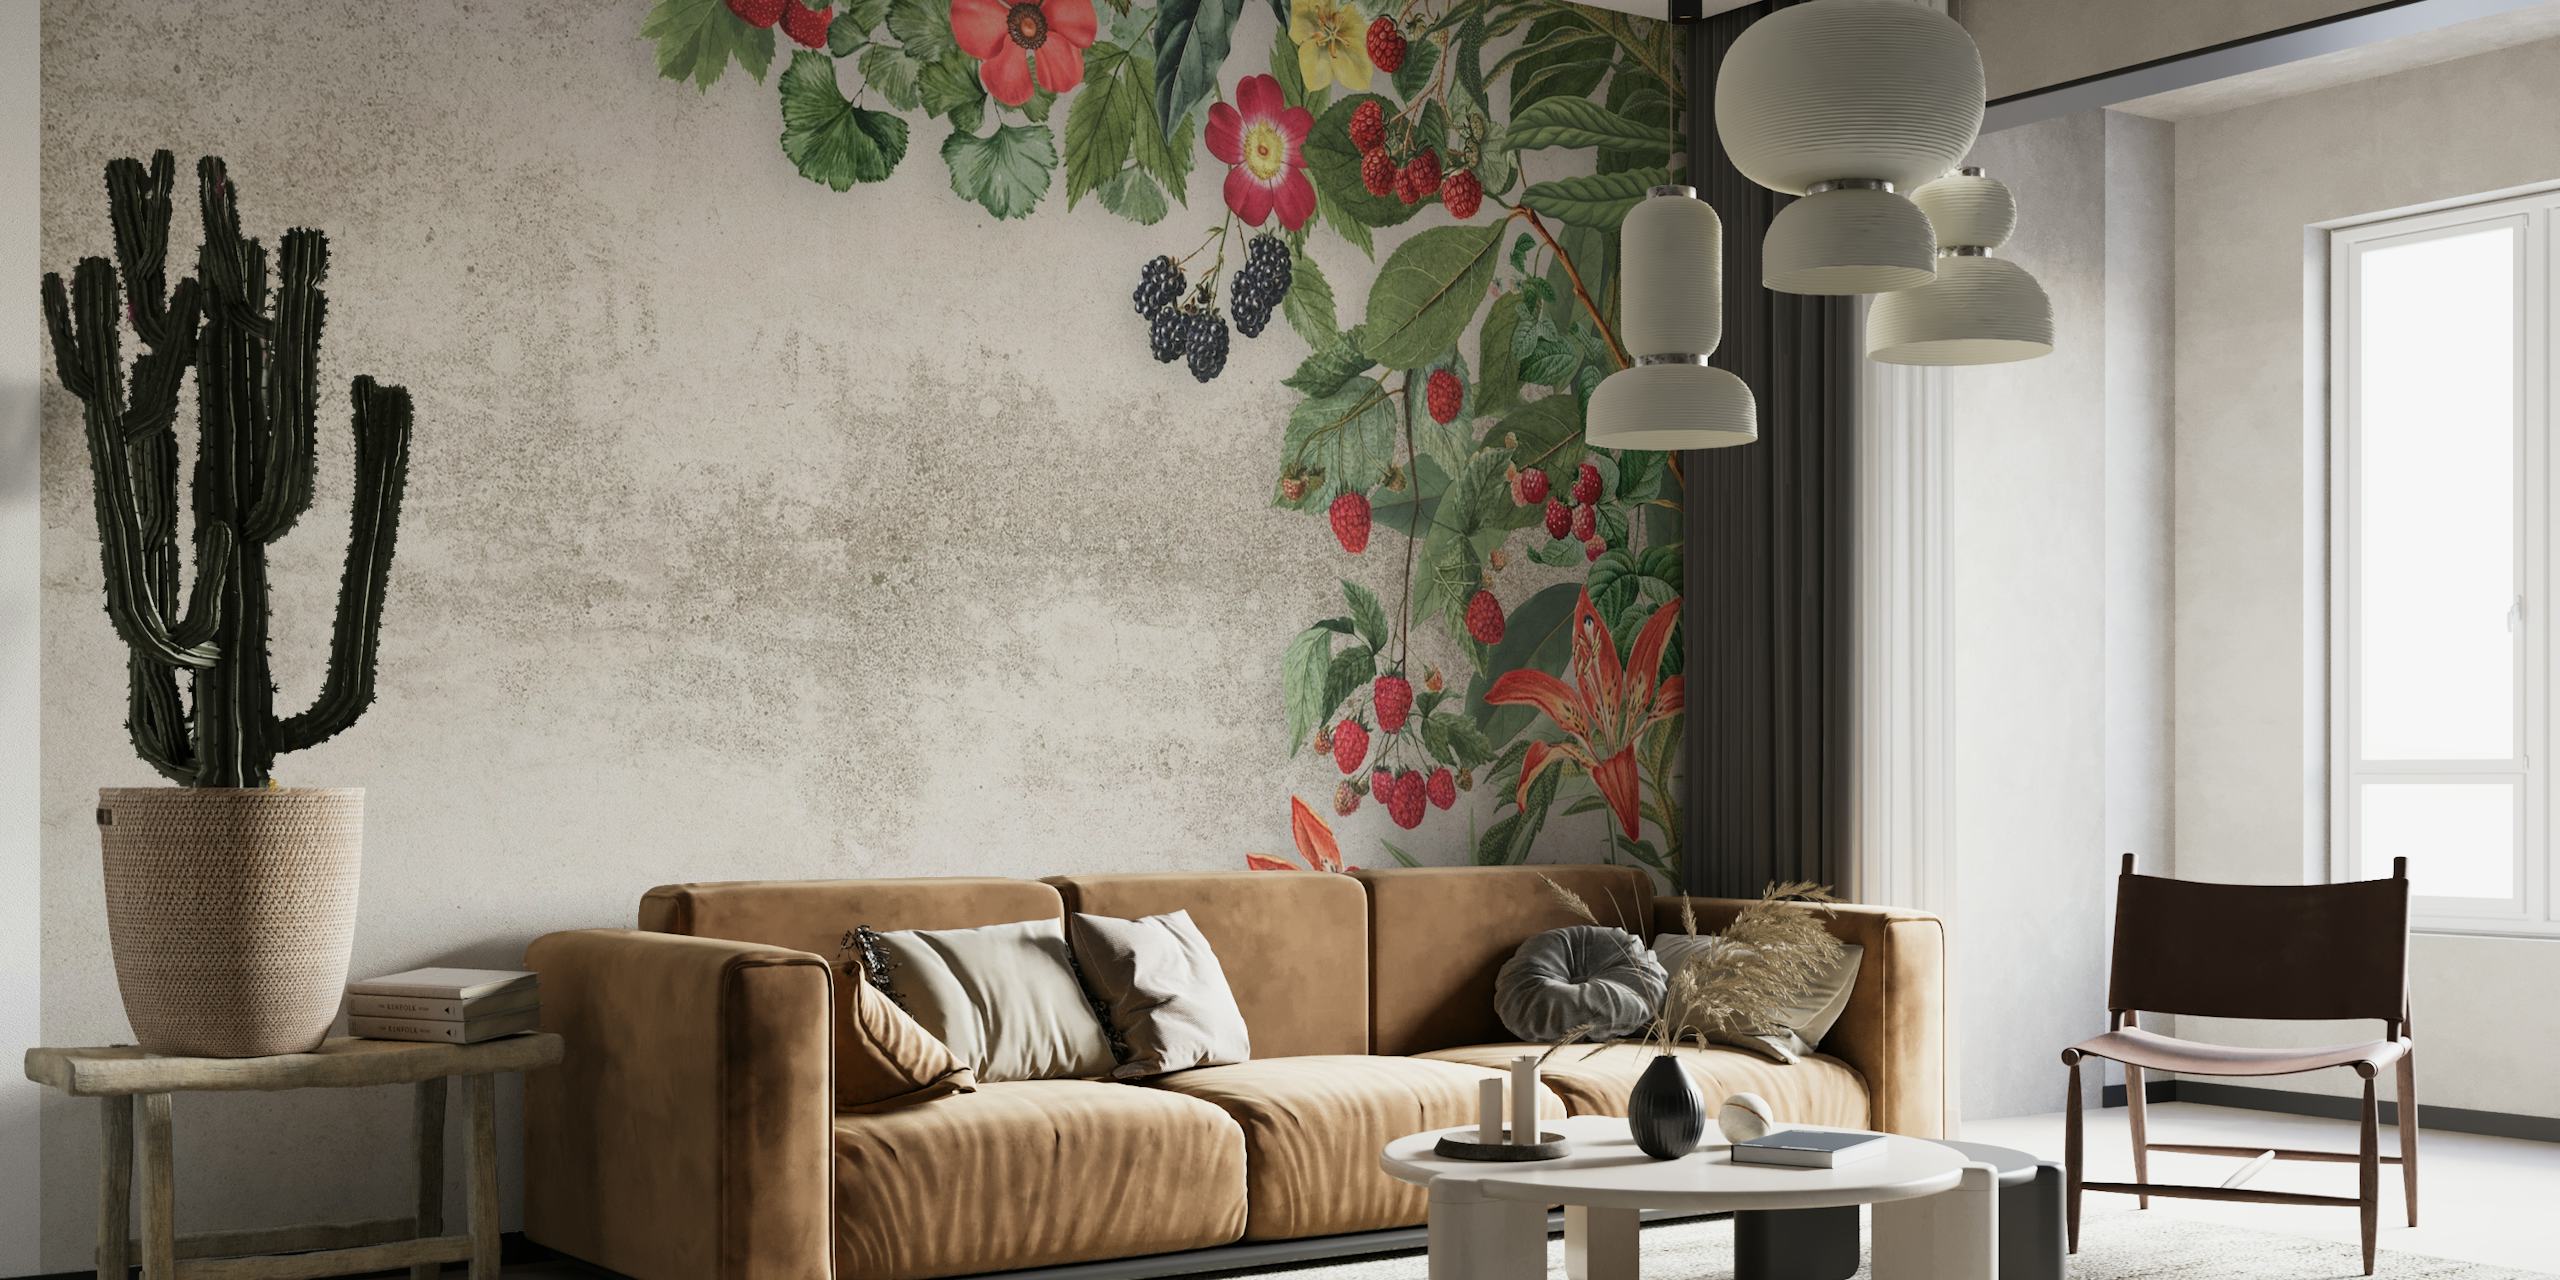 A tasteful 'Summer Berries' wall mural with a palette of red, blue, and green summer fruits and flowers on a neutral background.